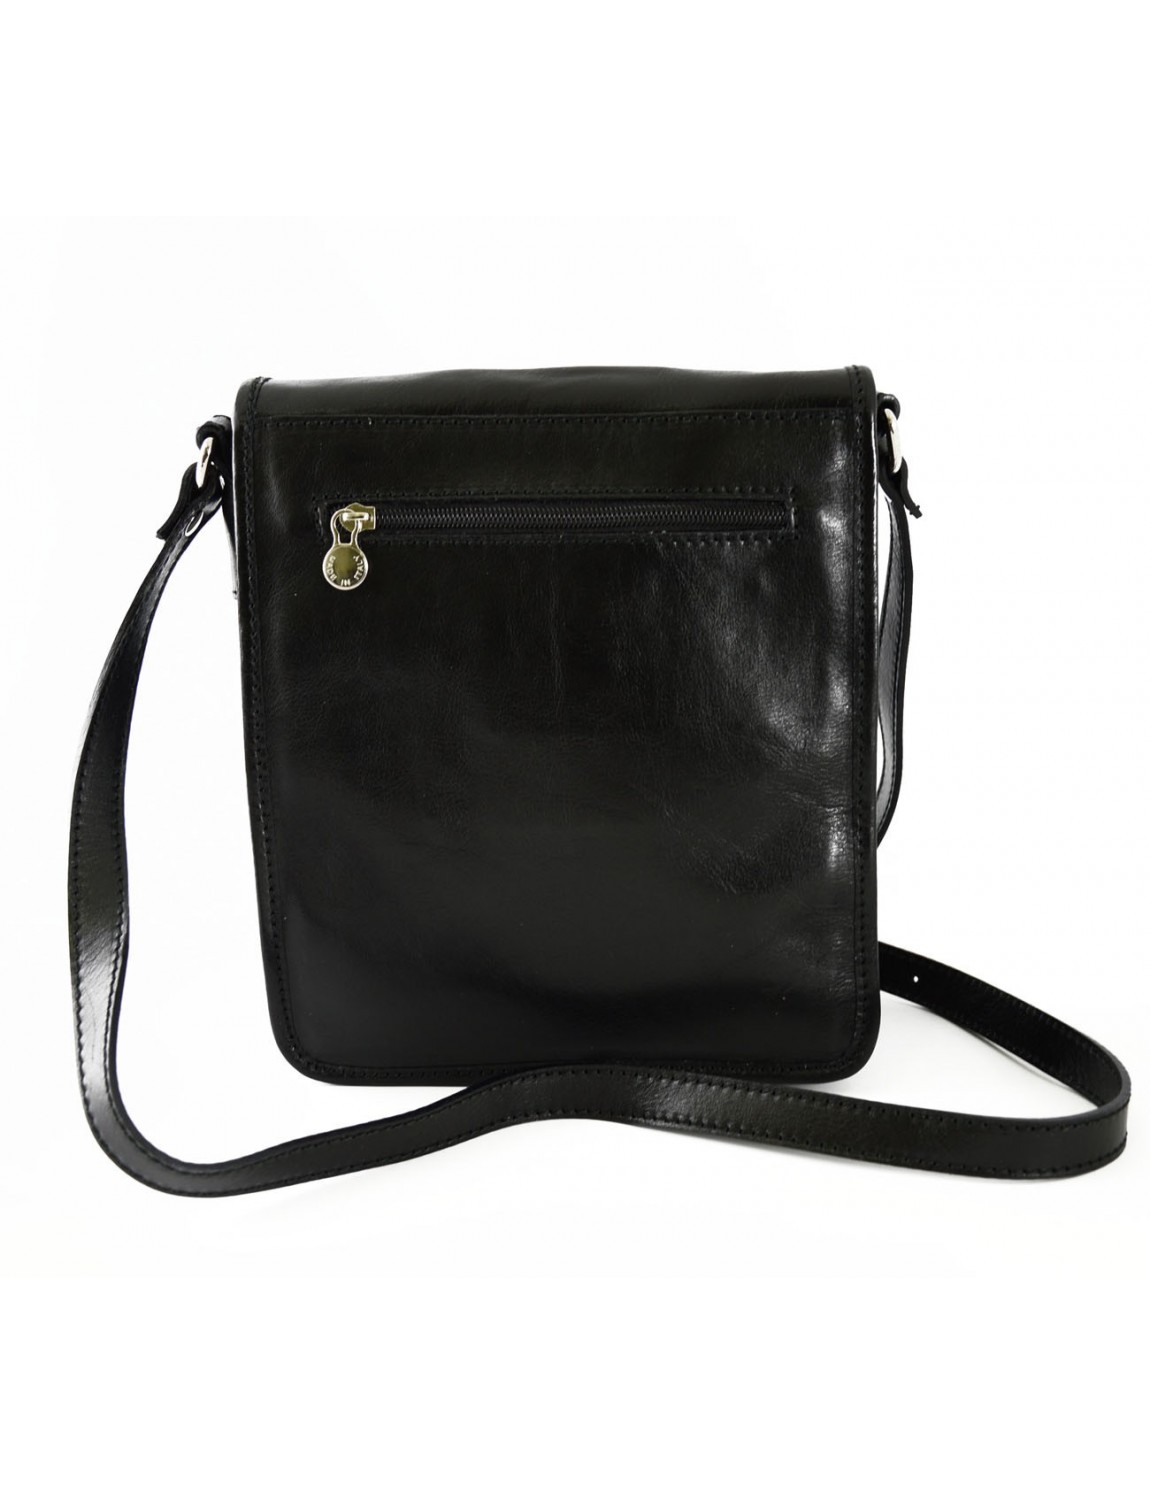 Genuine Leather Crossbody Bag 2 Compartments and Adjustable Shoulder Strap - Ronan